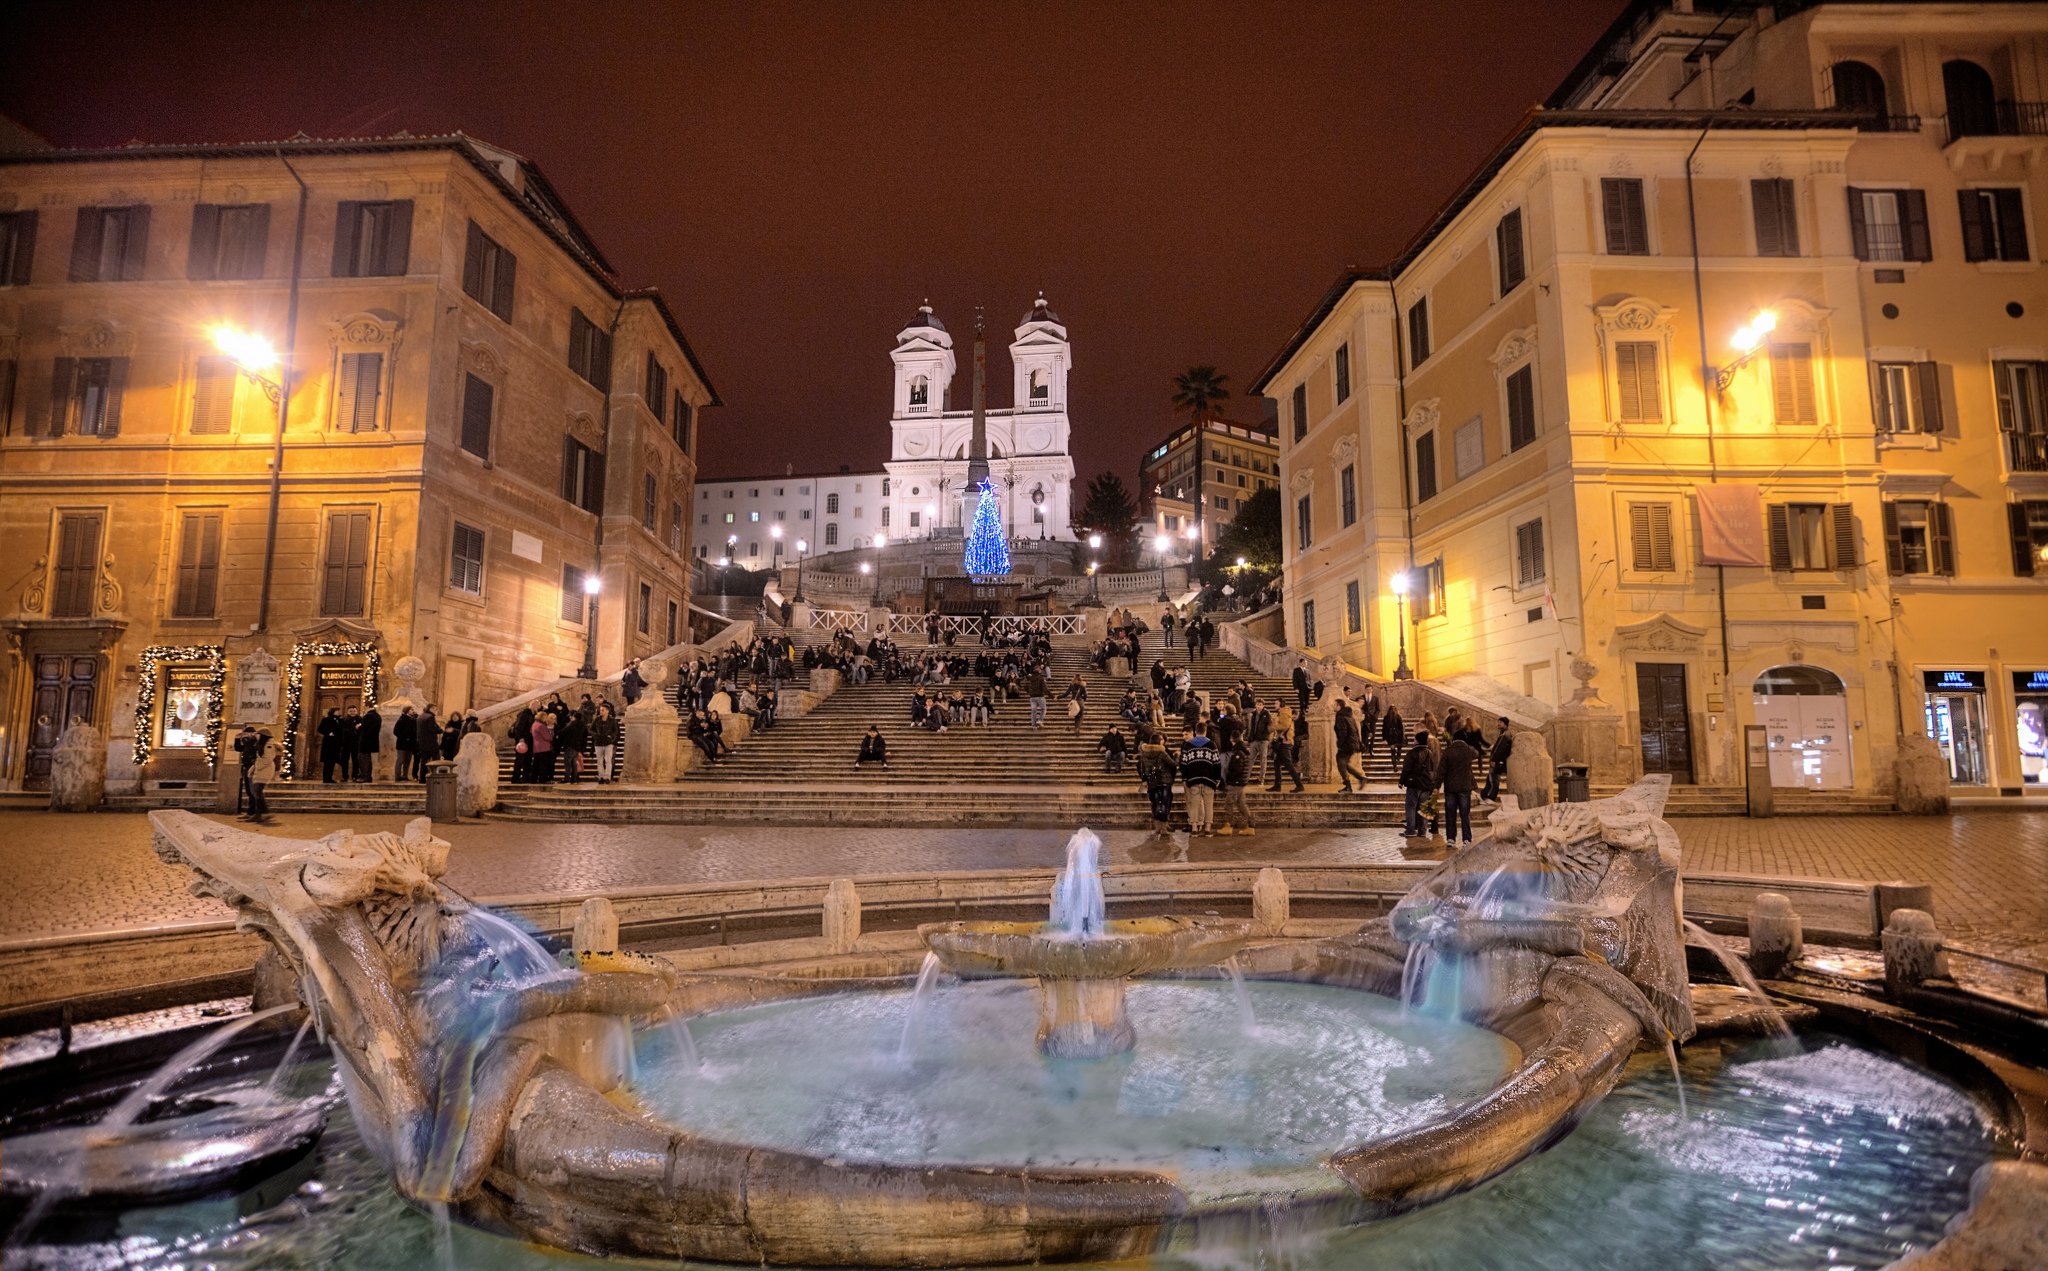 rome, Italy, Trinita, Dei, Monti, Spanish, Steps, Rome, Italy, Night, Buildings, Houses, Church, Stairs, Monument, Obelisk, Tree, Architecture, Fountain, Lights, People, Cities Wallpaper